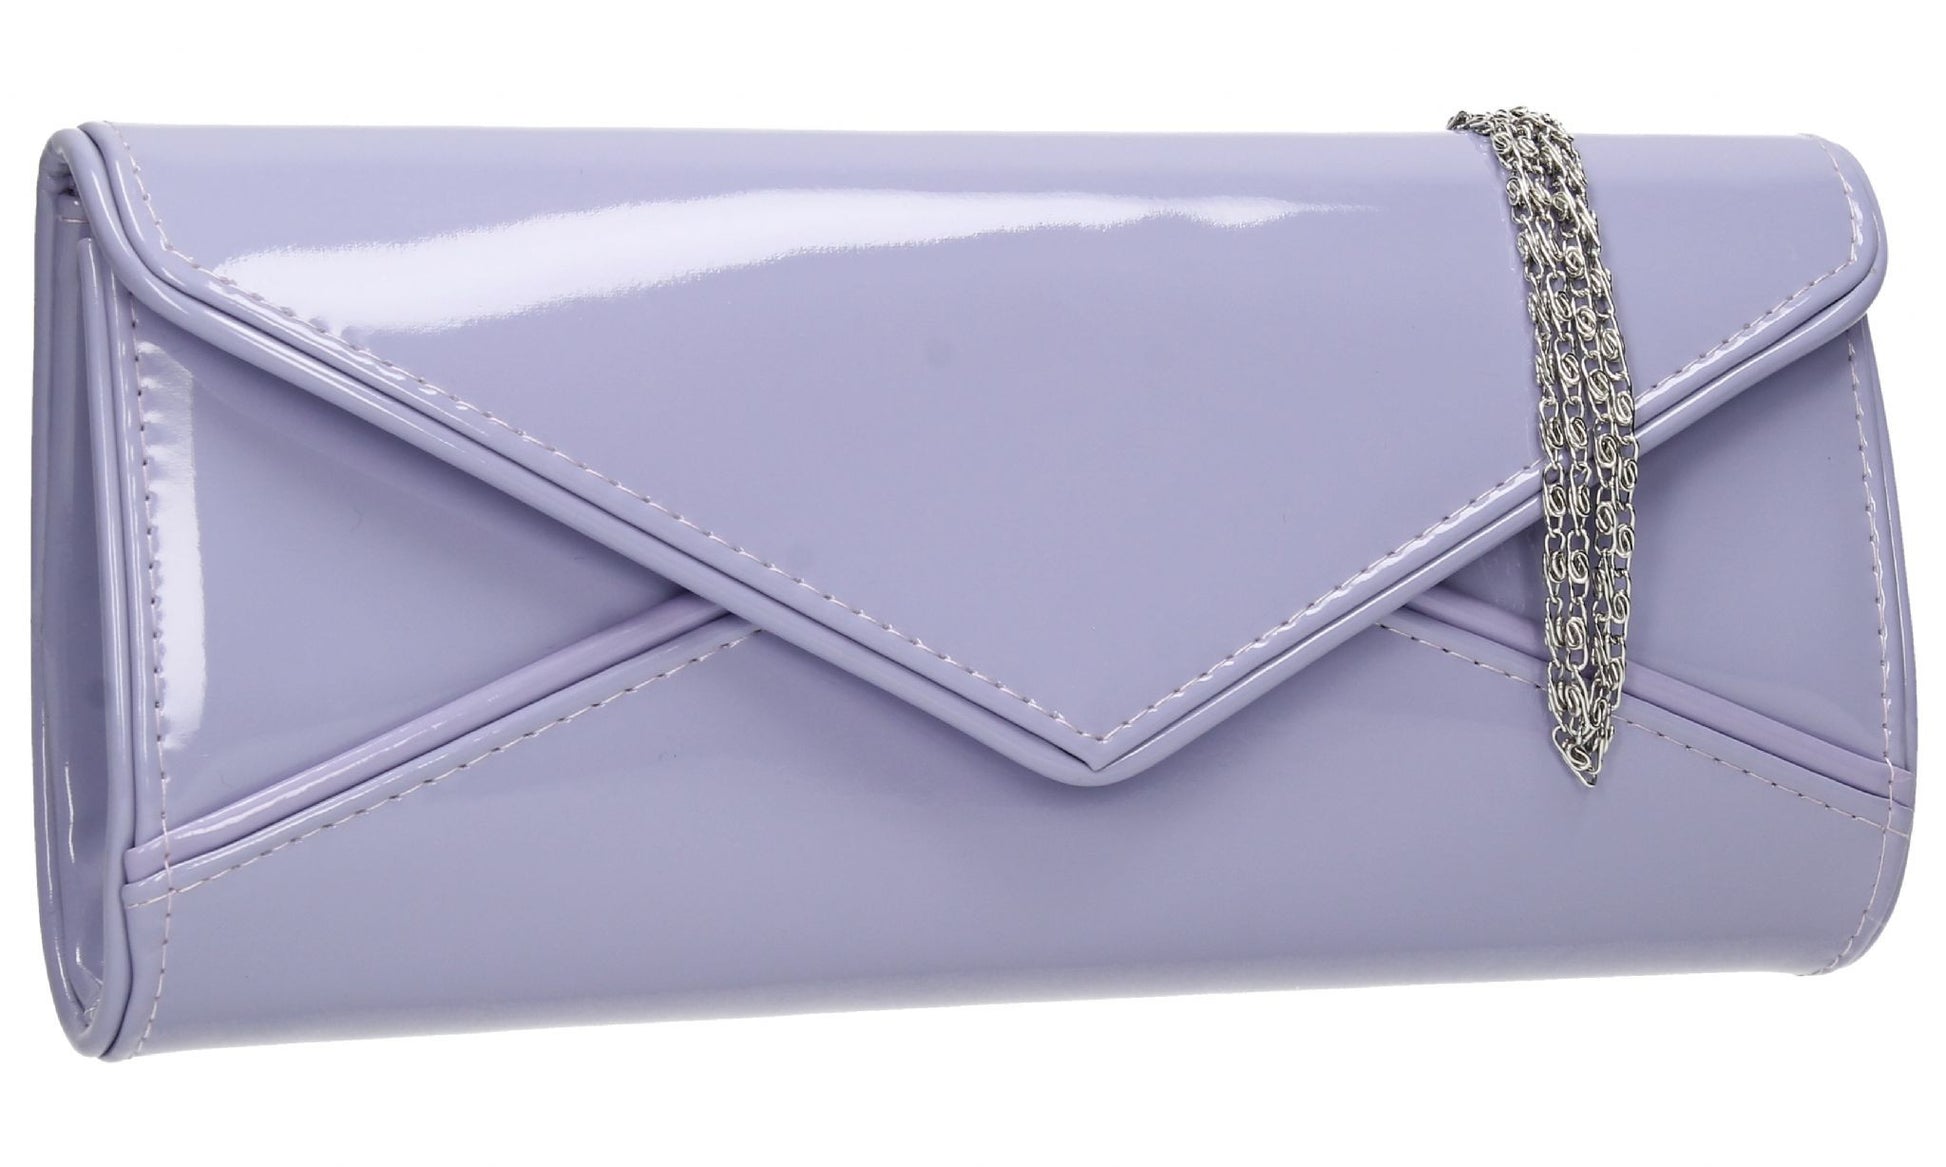 SWANKYSWANS Perry Patent Clutch Bag - Lilac Cute Cheap Clutch Bag For Weddings School and Work